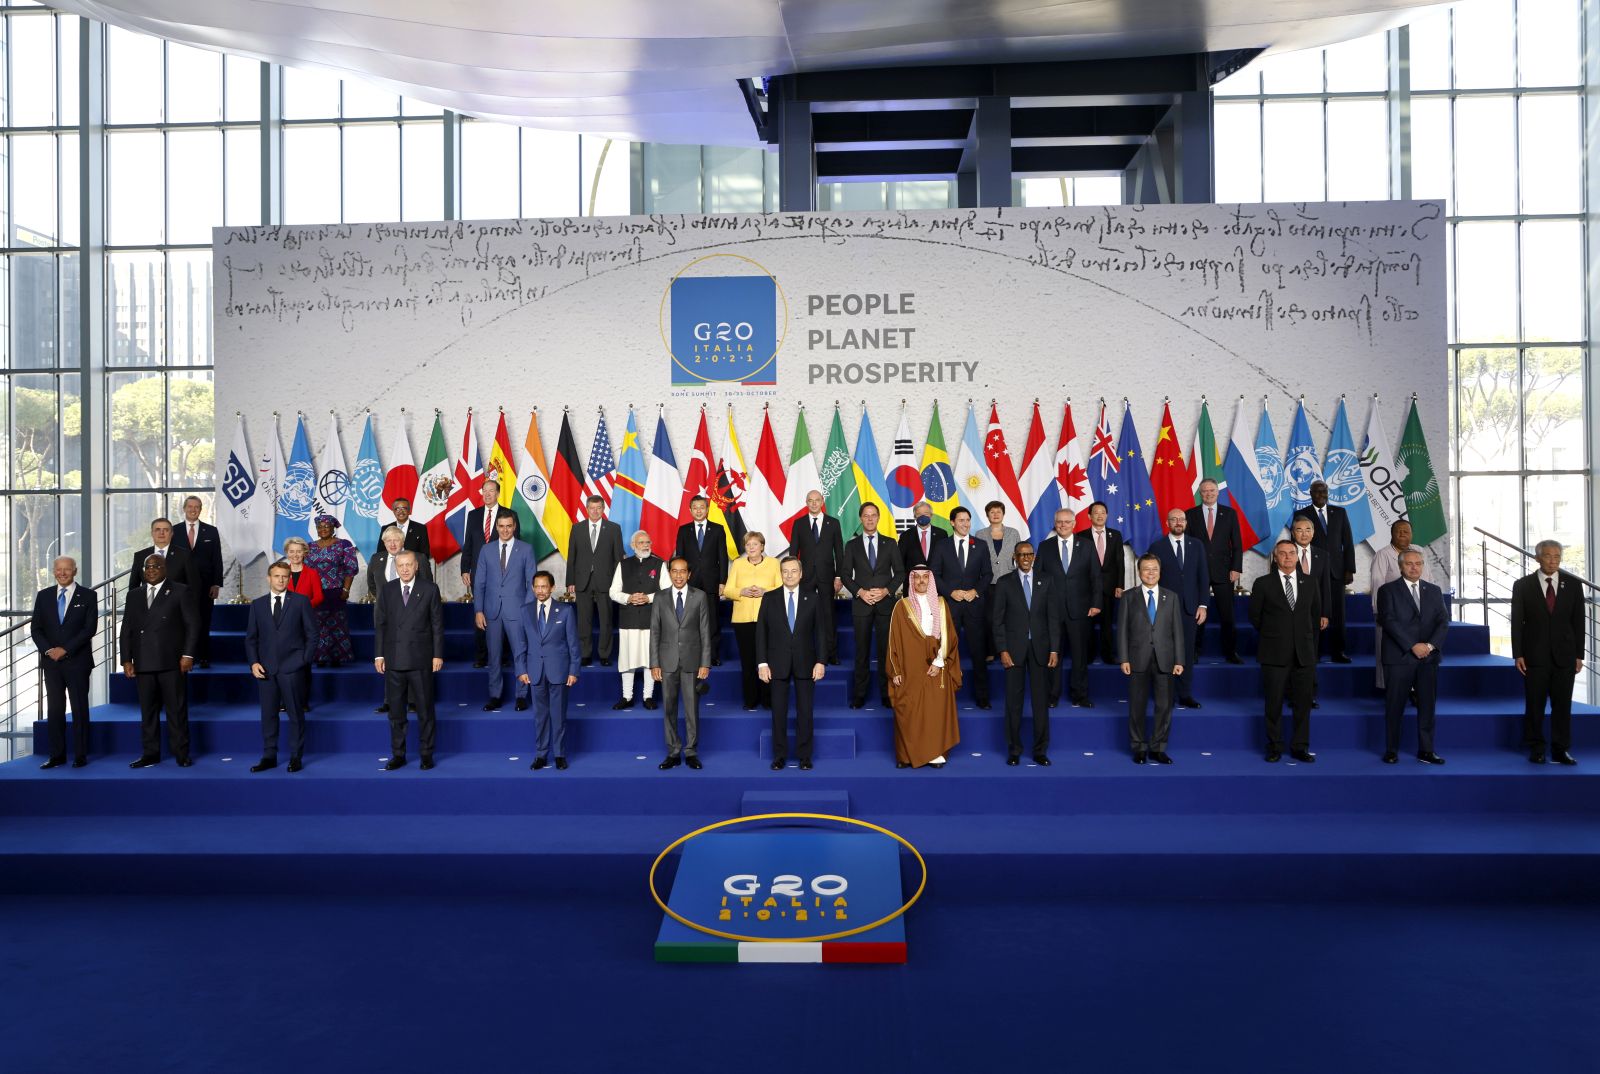 epa09553423 Italian Prime Minister Mario Draghi (C, front) stands with world leaders as they gather for the official family photograph on day one of the G20 Summit at the convention center of La Nuvola, in the EUR district of Rome, Italy, 30 October 2021. Climate change and the relaunch of the global economy will top the G20 agenda as leaders of the world's most advanced nations meet October 30, the first in-person gathering since the pandemic.  EPA/LUDOVIC MARIN / POOL  MAXPPP OUT